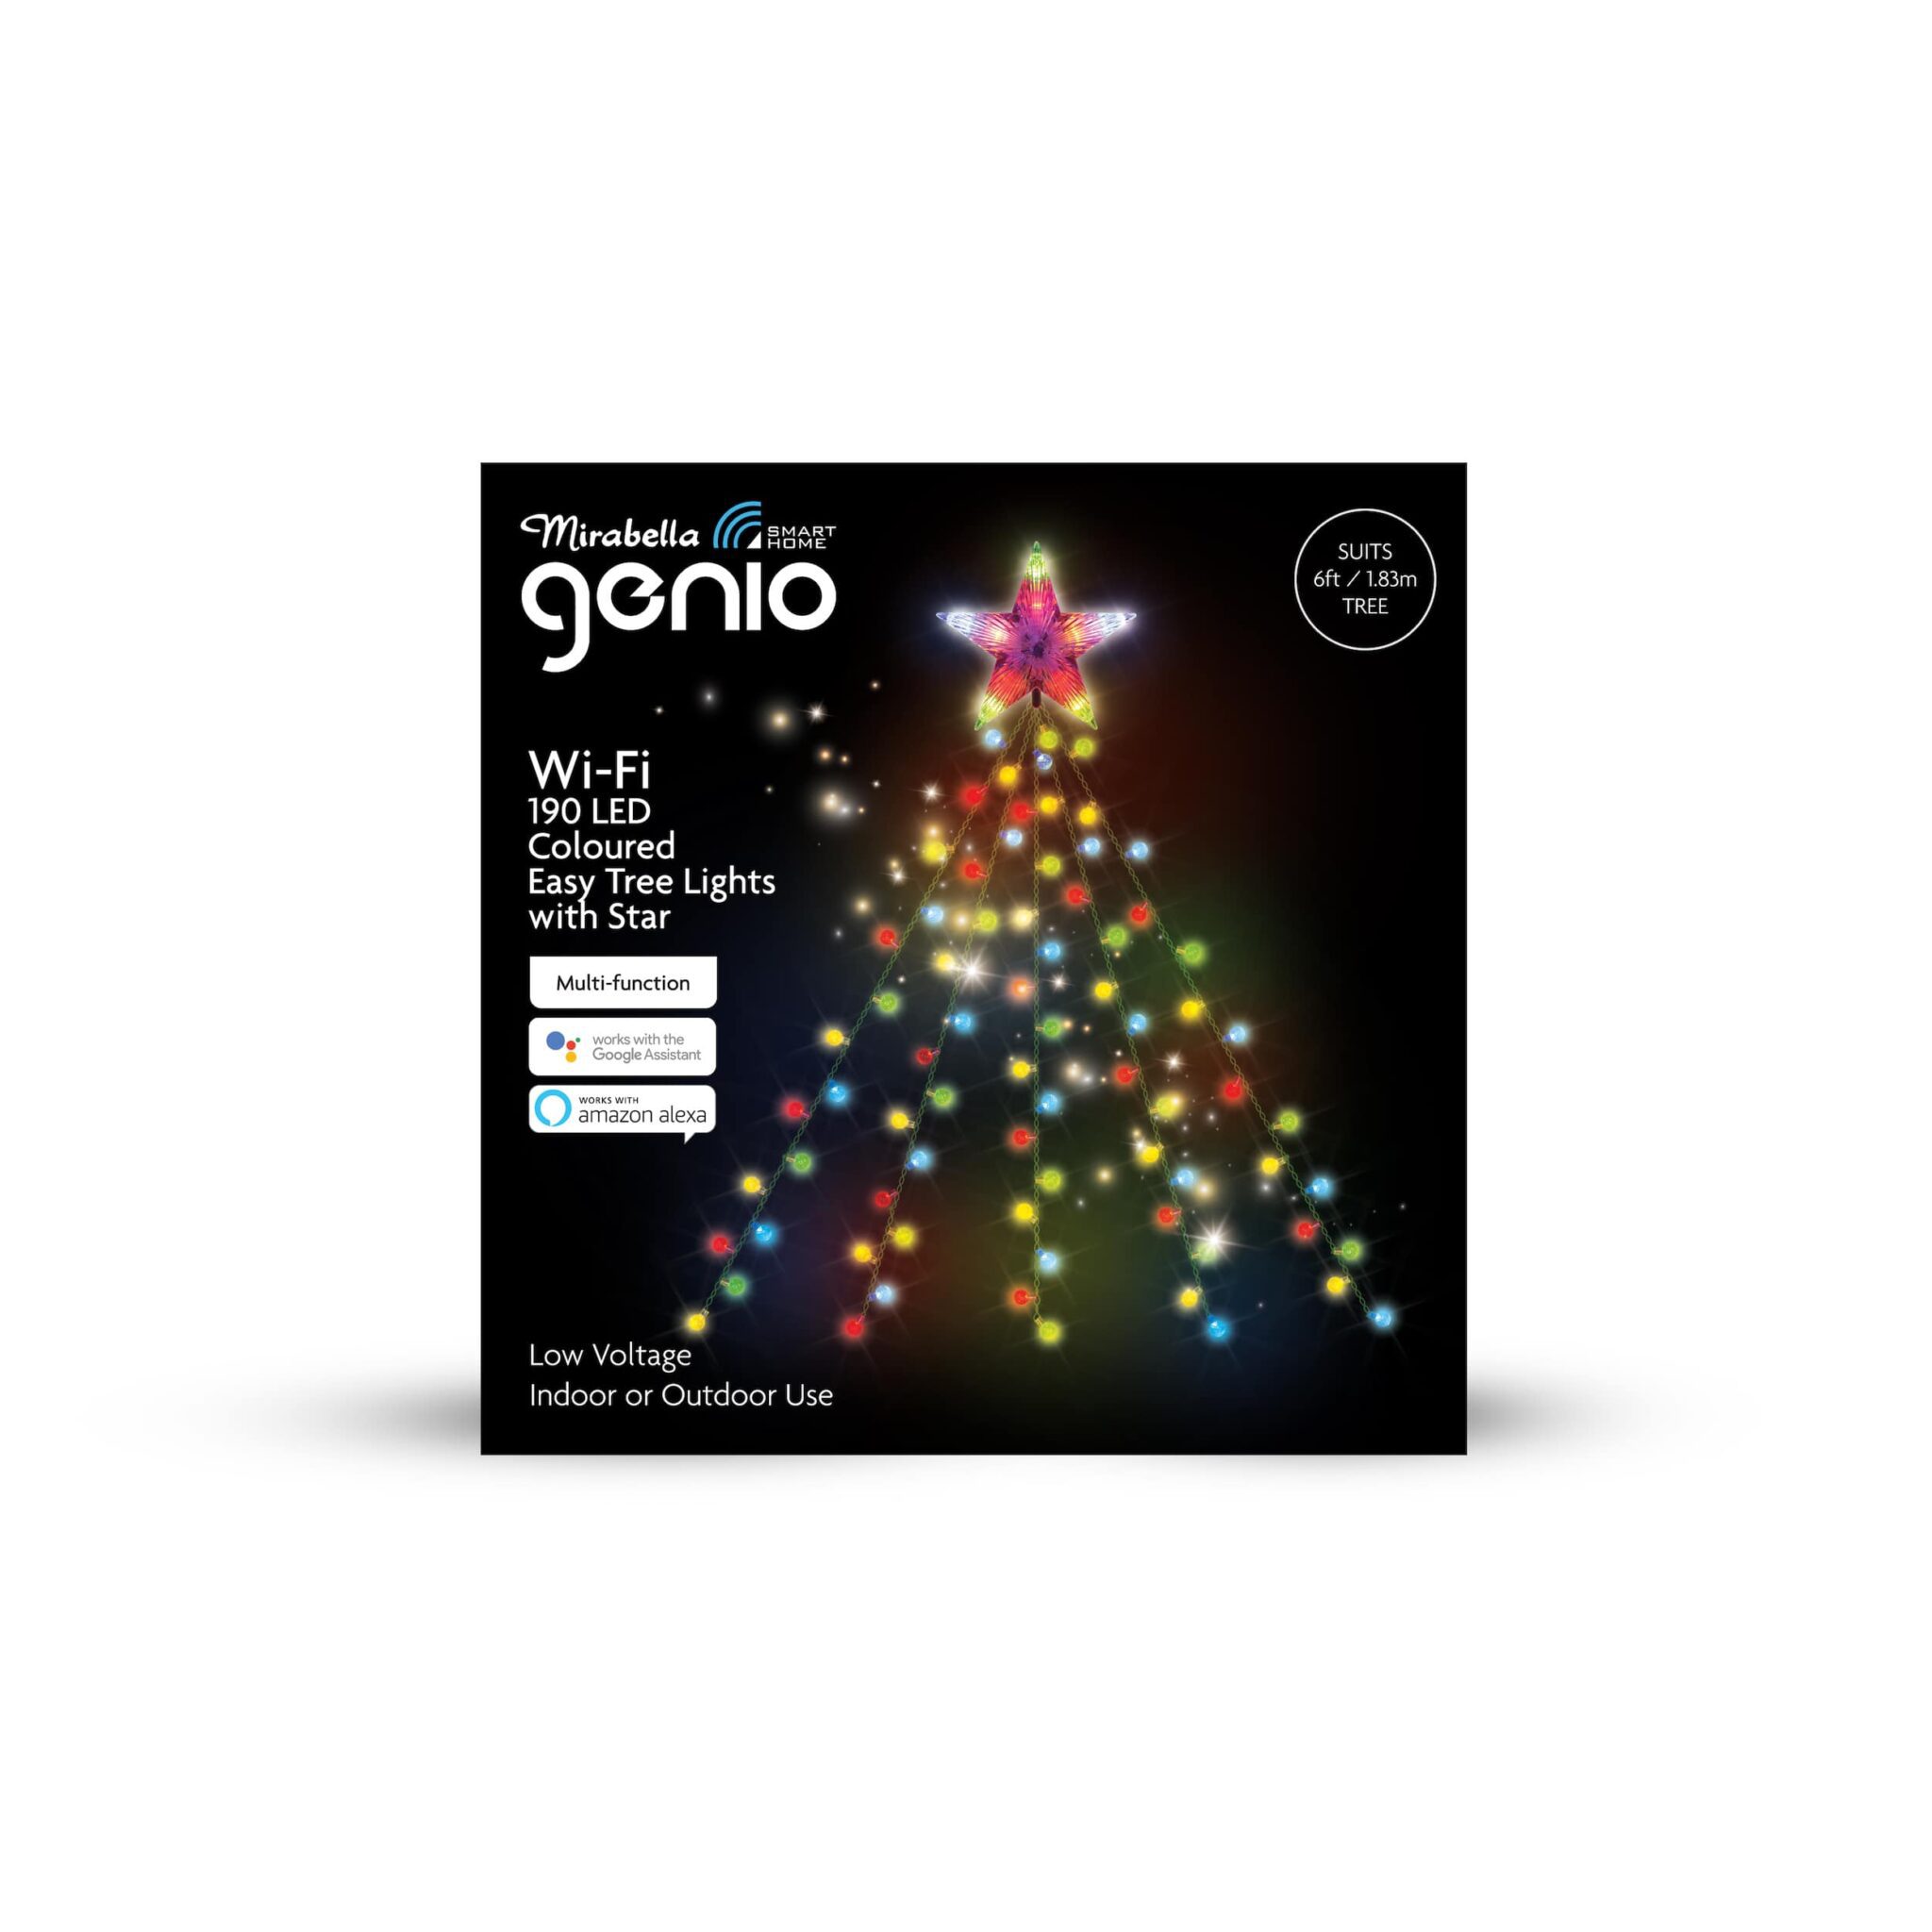 Mirabella Genio Wi-Fi 1.8M 190 LED Coloured Easy Tree Lights With Star